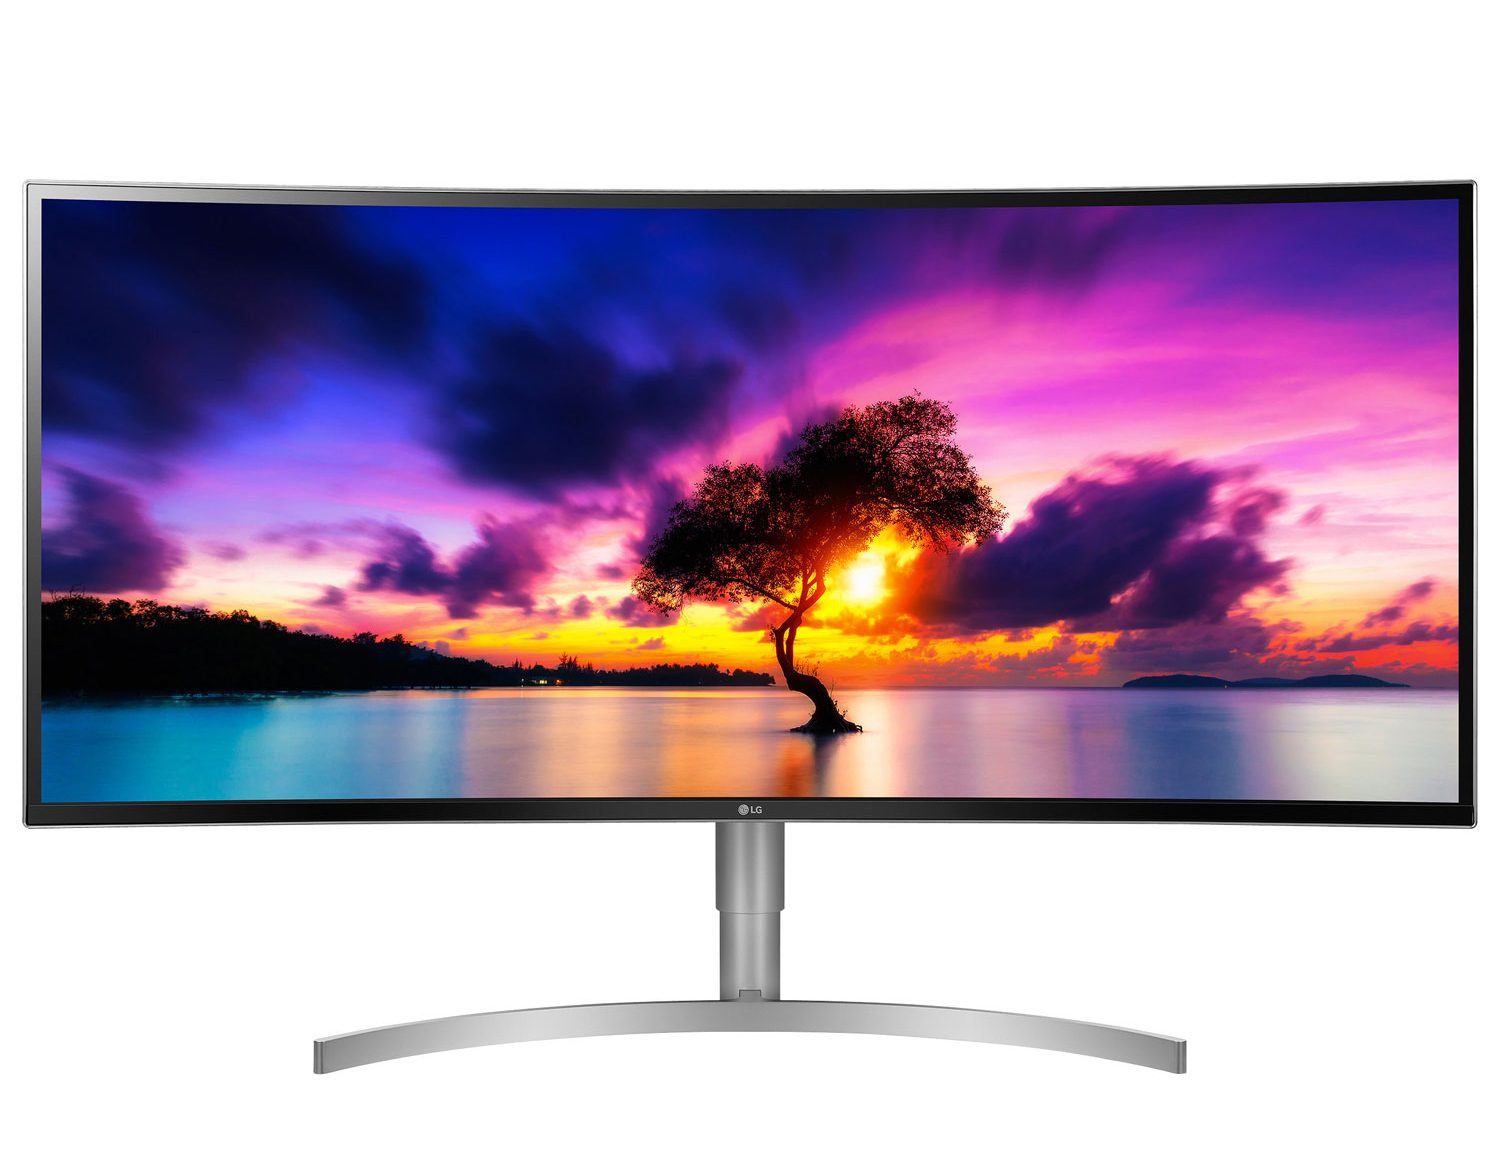 LG UltraWide Curved Computer Monitor